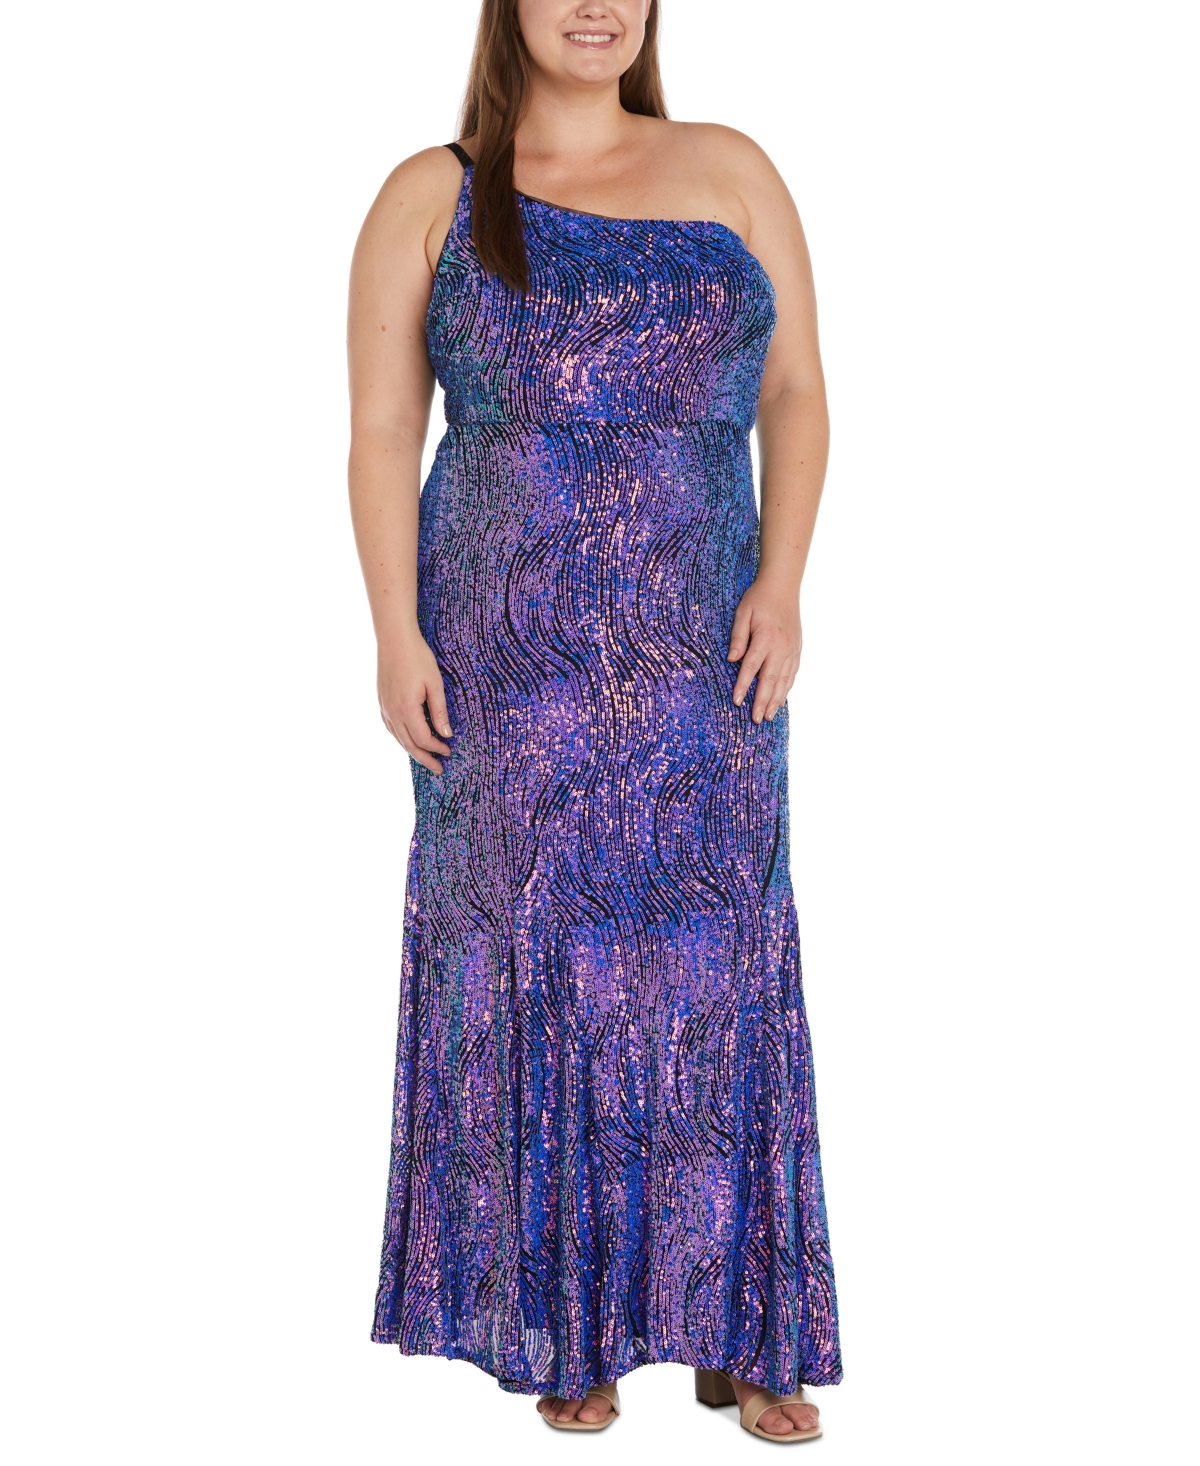 Trendy Plus Size Sequined One-Shoulder Gown - Black/Purlpe